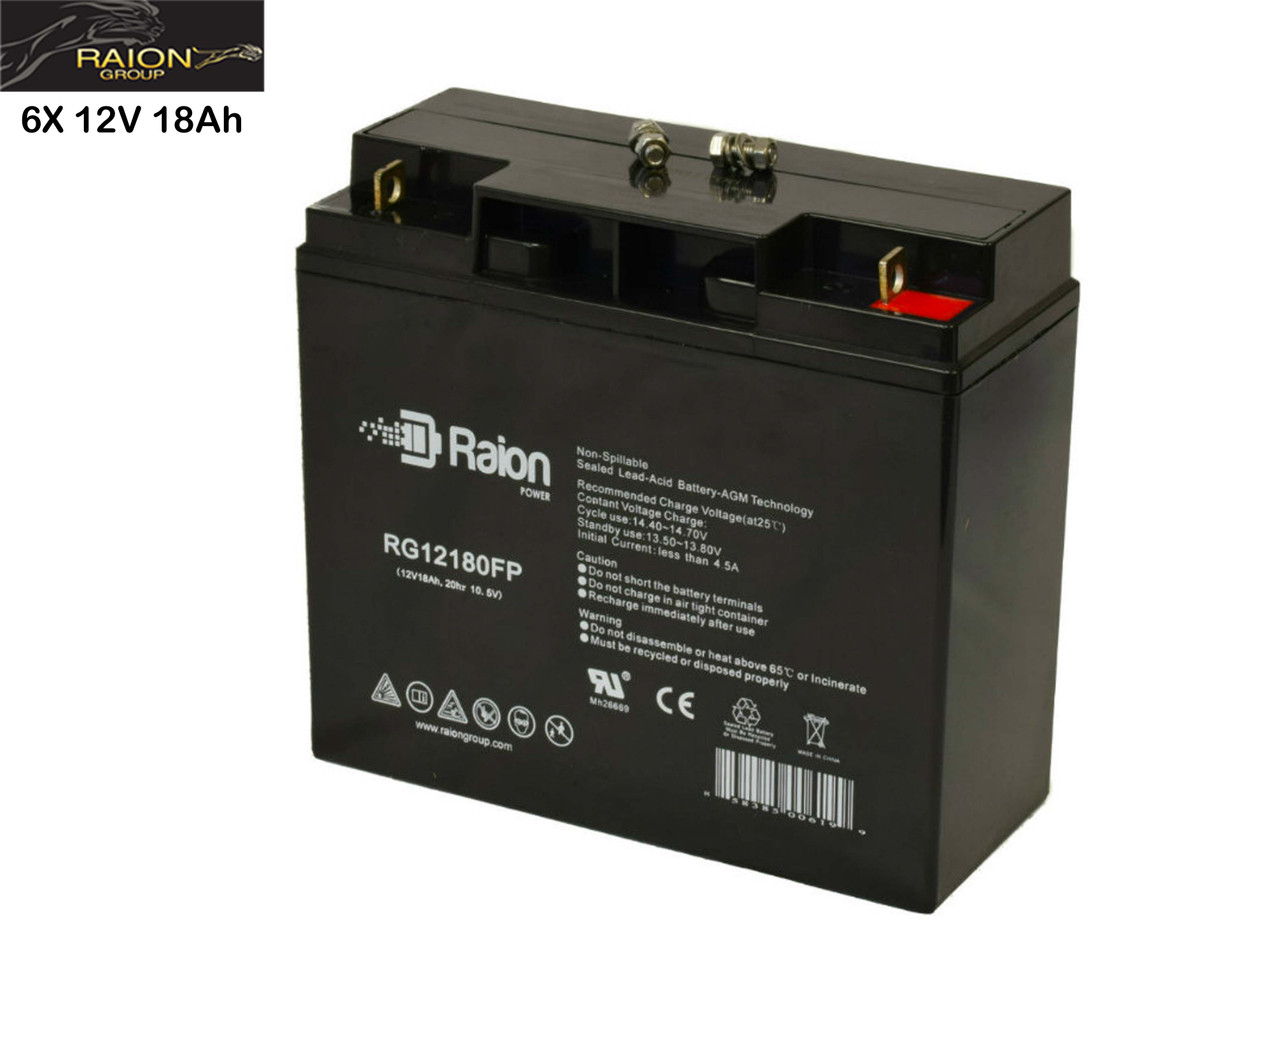 Raion Power Replacement 12V 18Ah Battery for Daymak Lonestar - 6 Pack